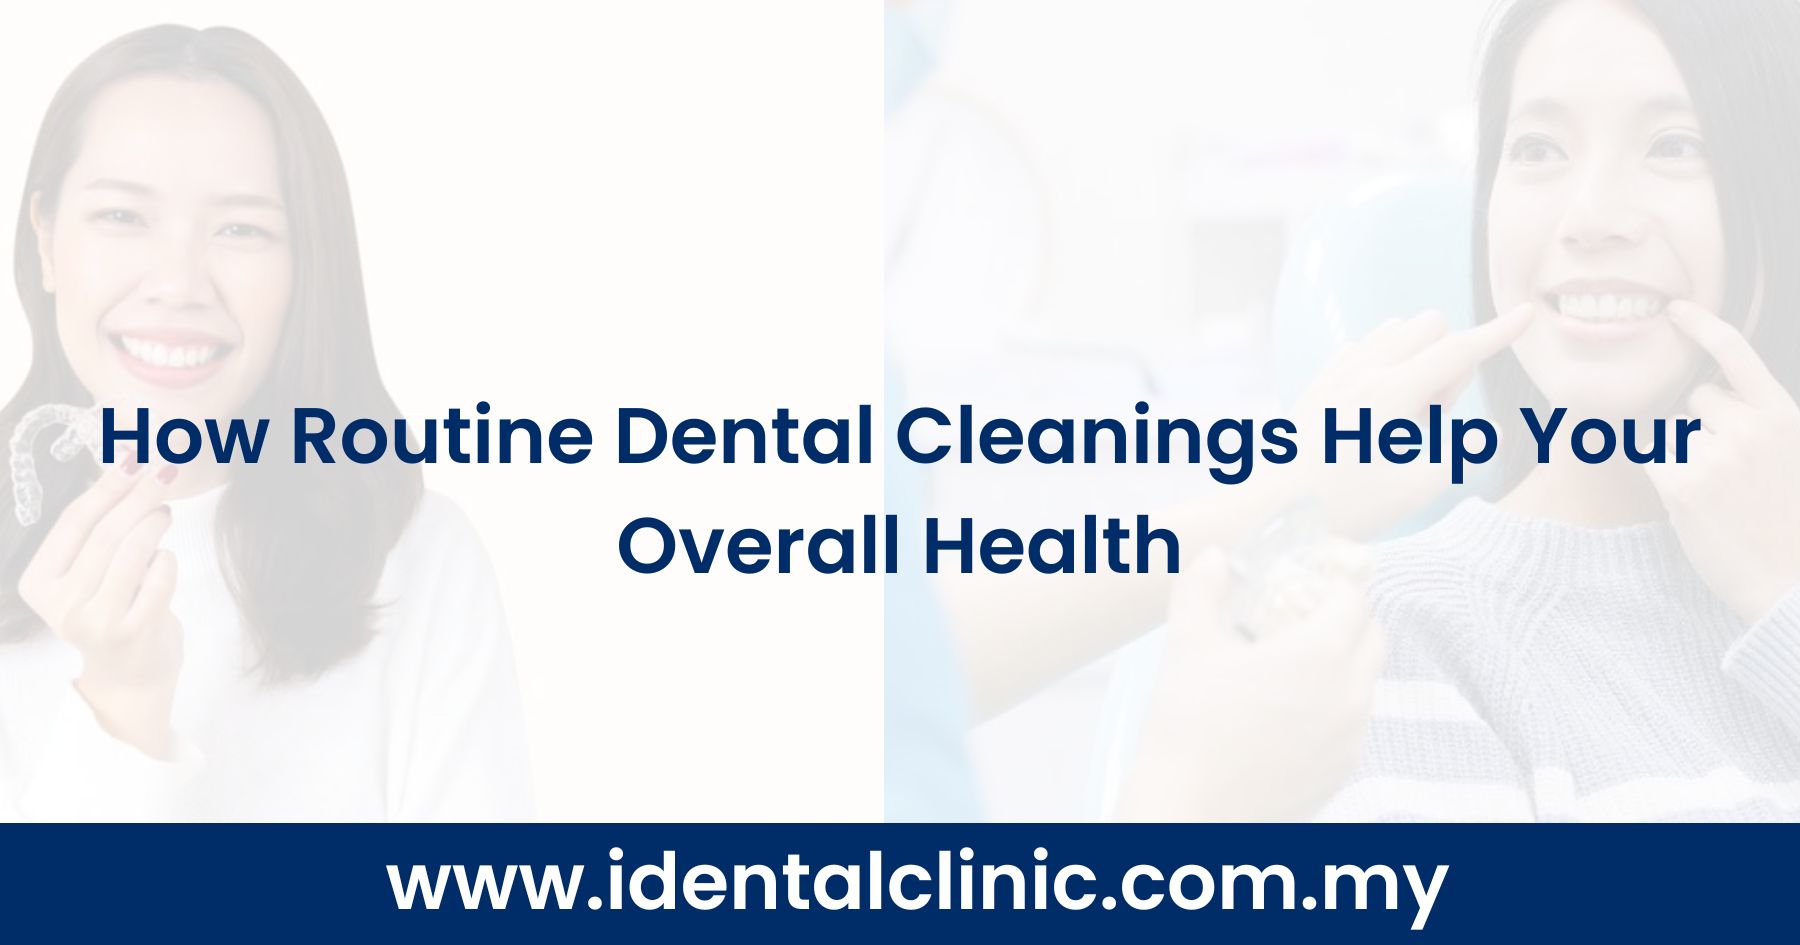 How Routine Dental Cleanings Help Your Overall Health